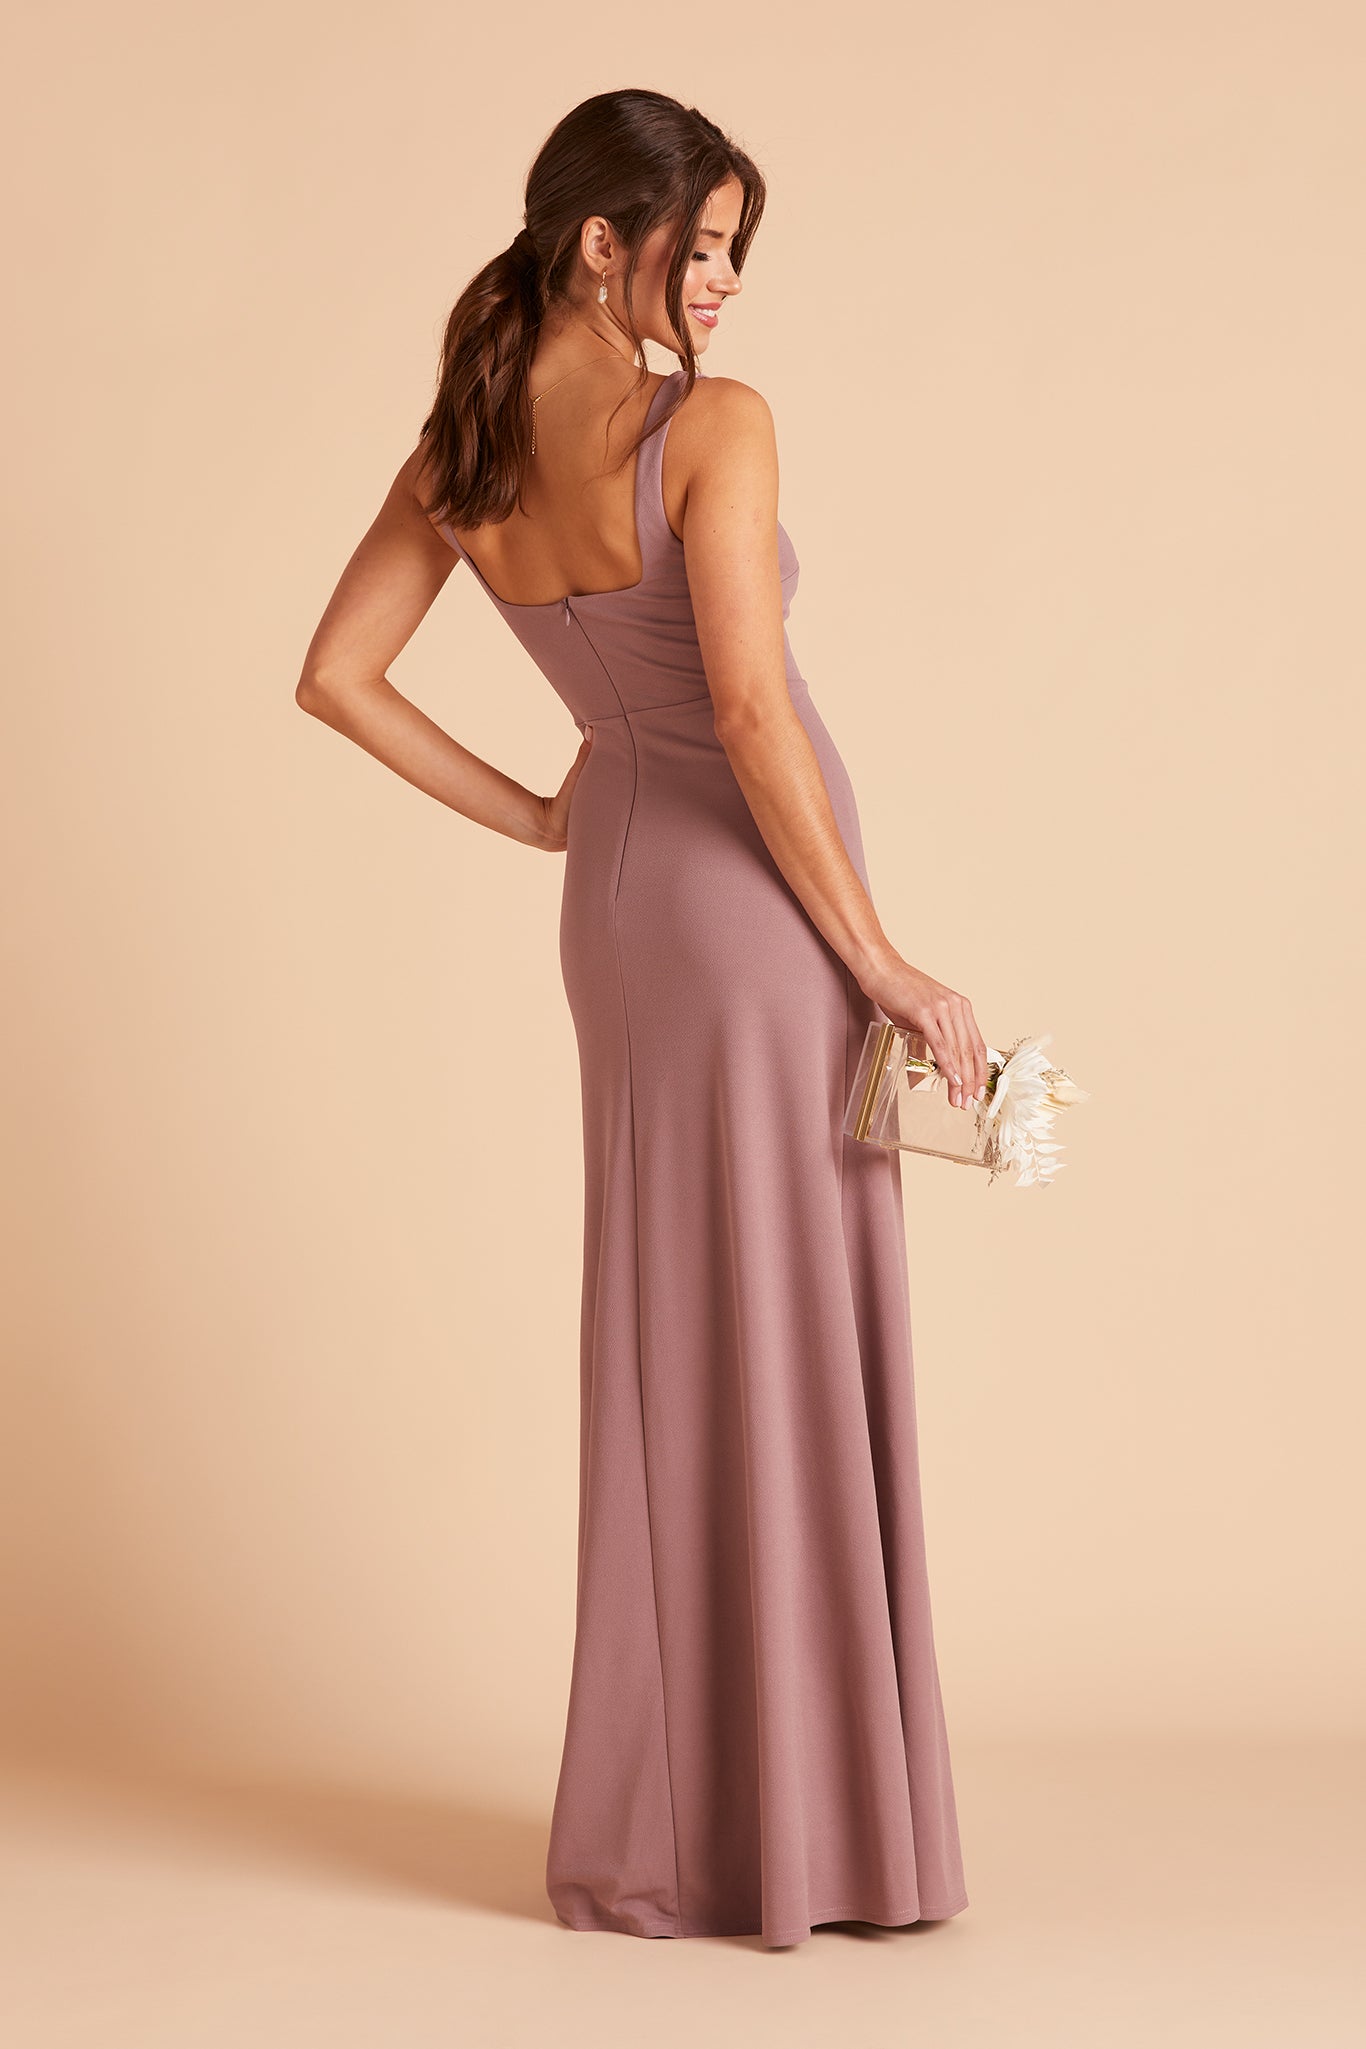 Alex convertible bridesmaid dress with slit in dark mauve crepe by Birdy Grey, side view